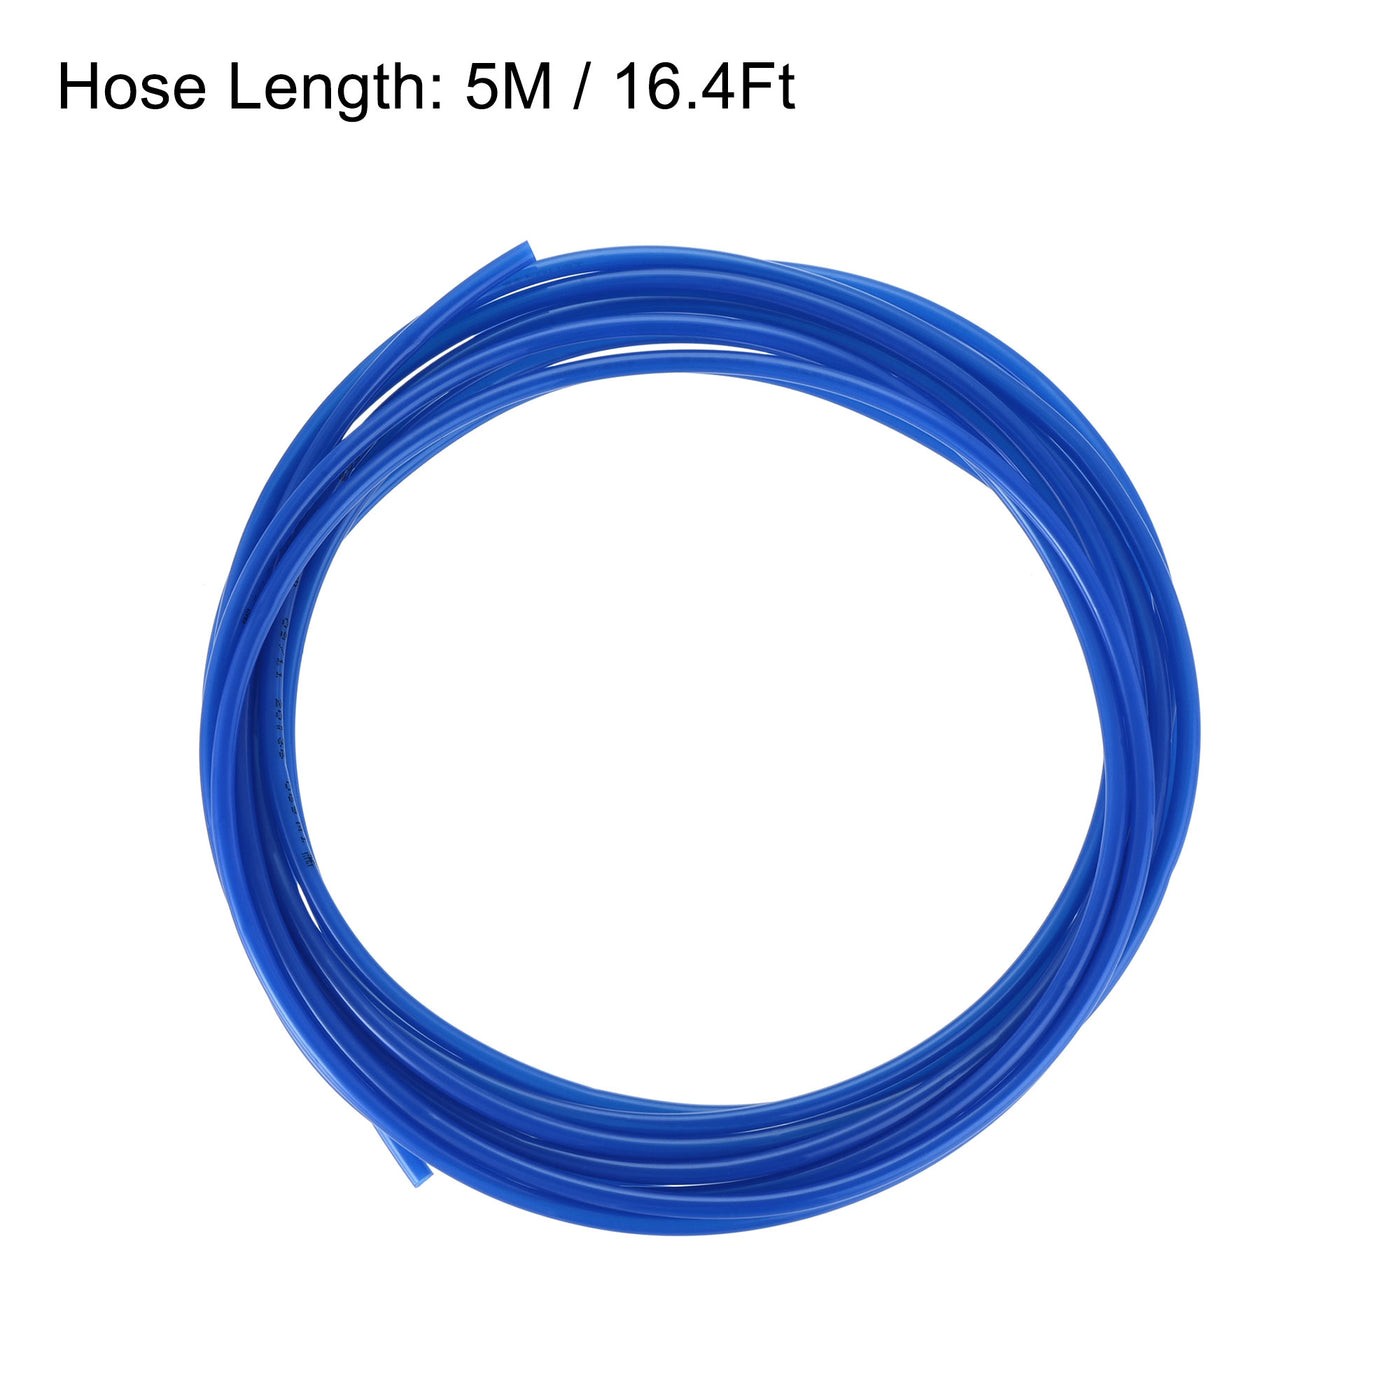 uxcell Uxcell Pneumatic 4mm OD PU Air Hose Tubing Kit 5M Blue with Push to Connect Fittings